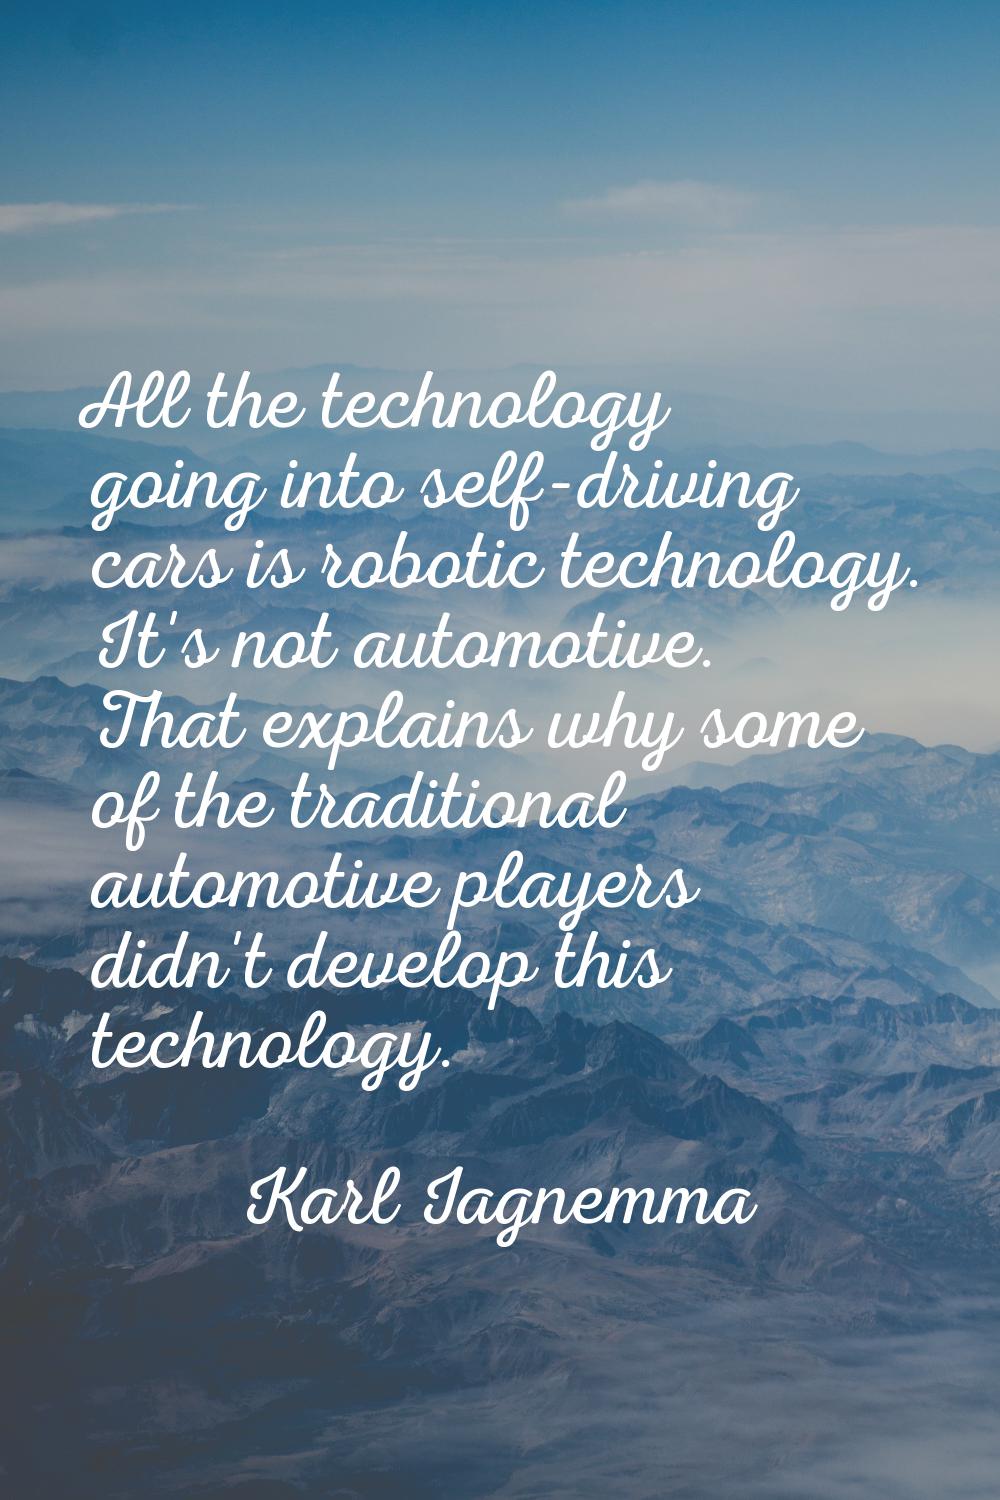 All the technology going into self-driving cars is robotic technology. It's not automotive. That ex